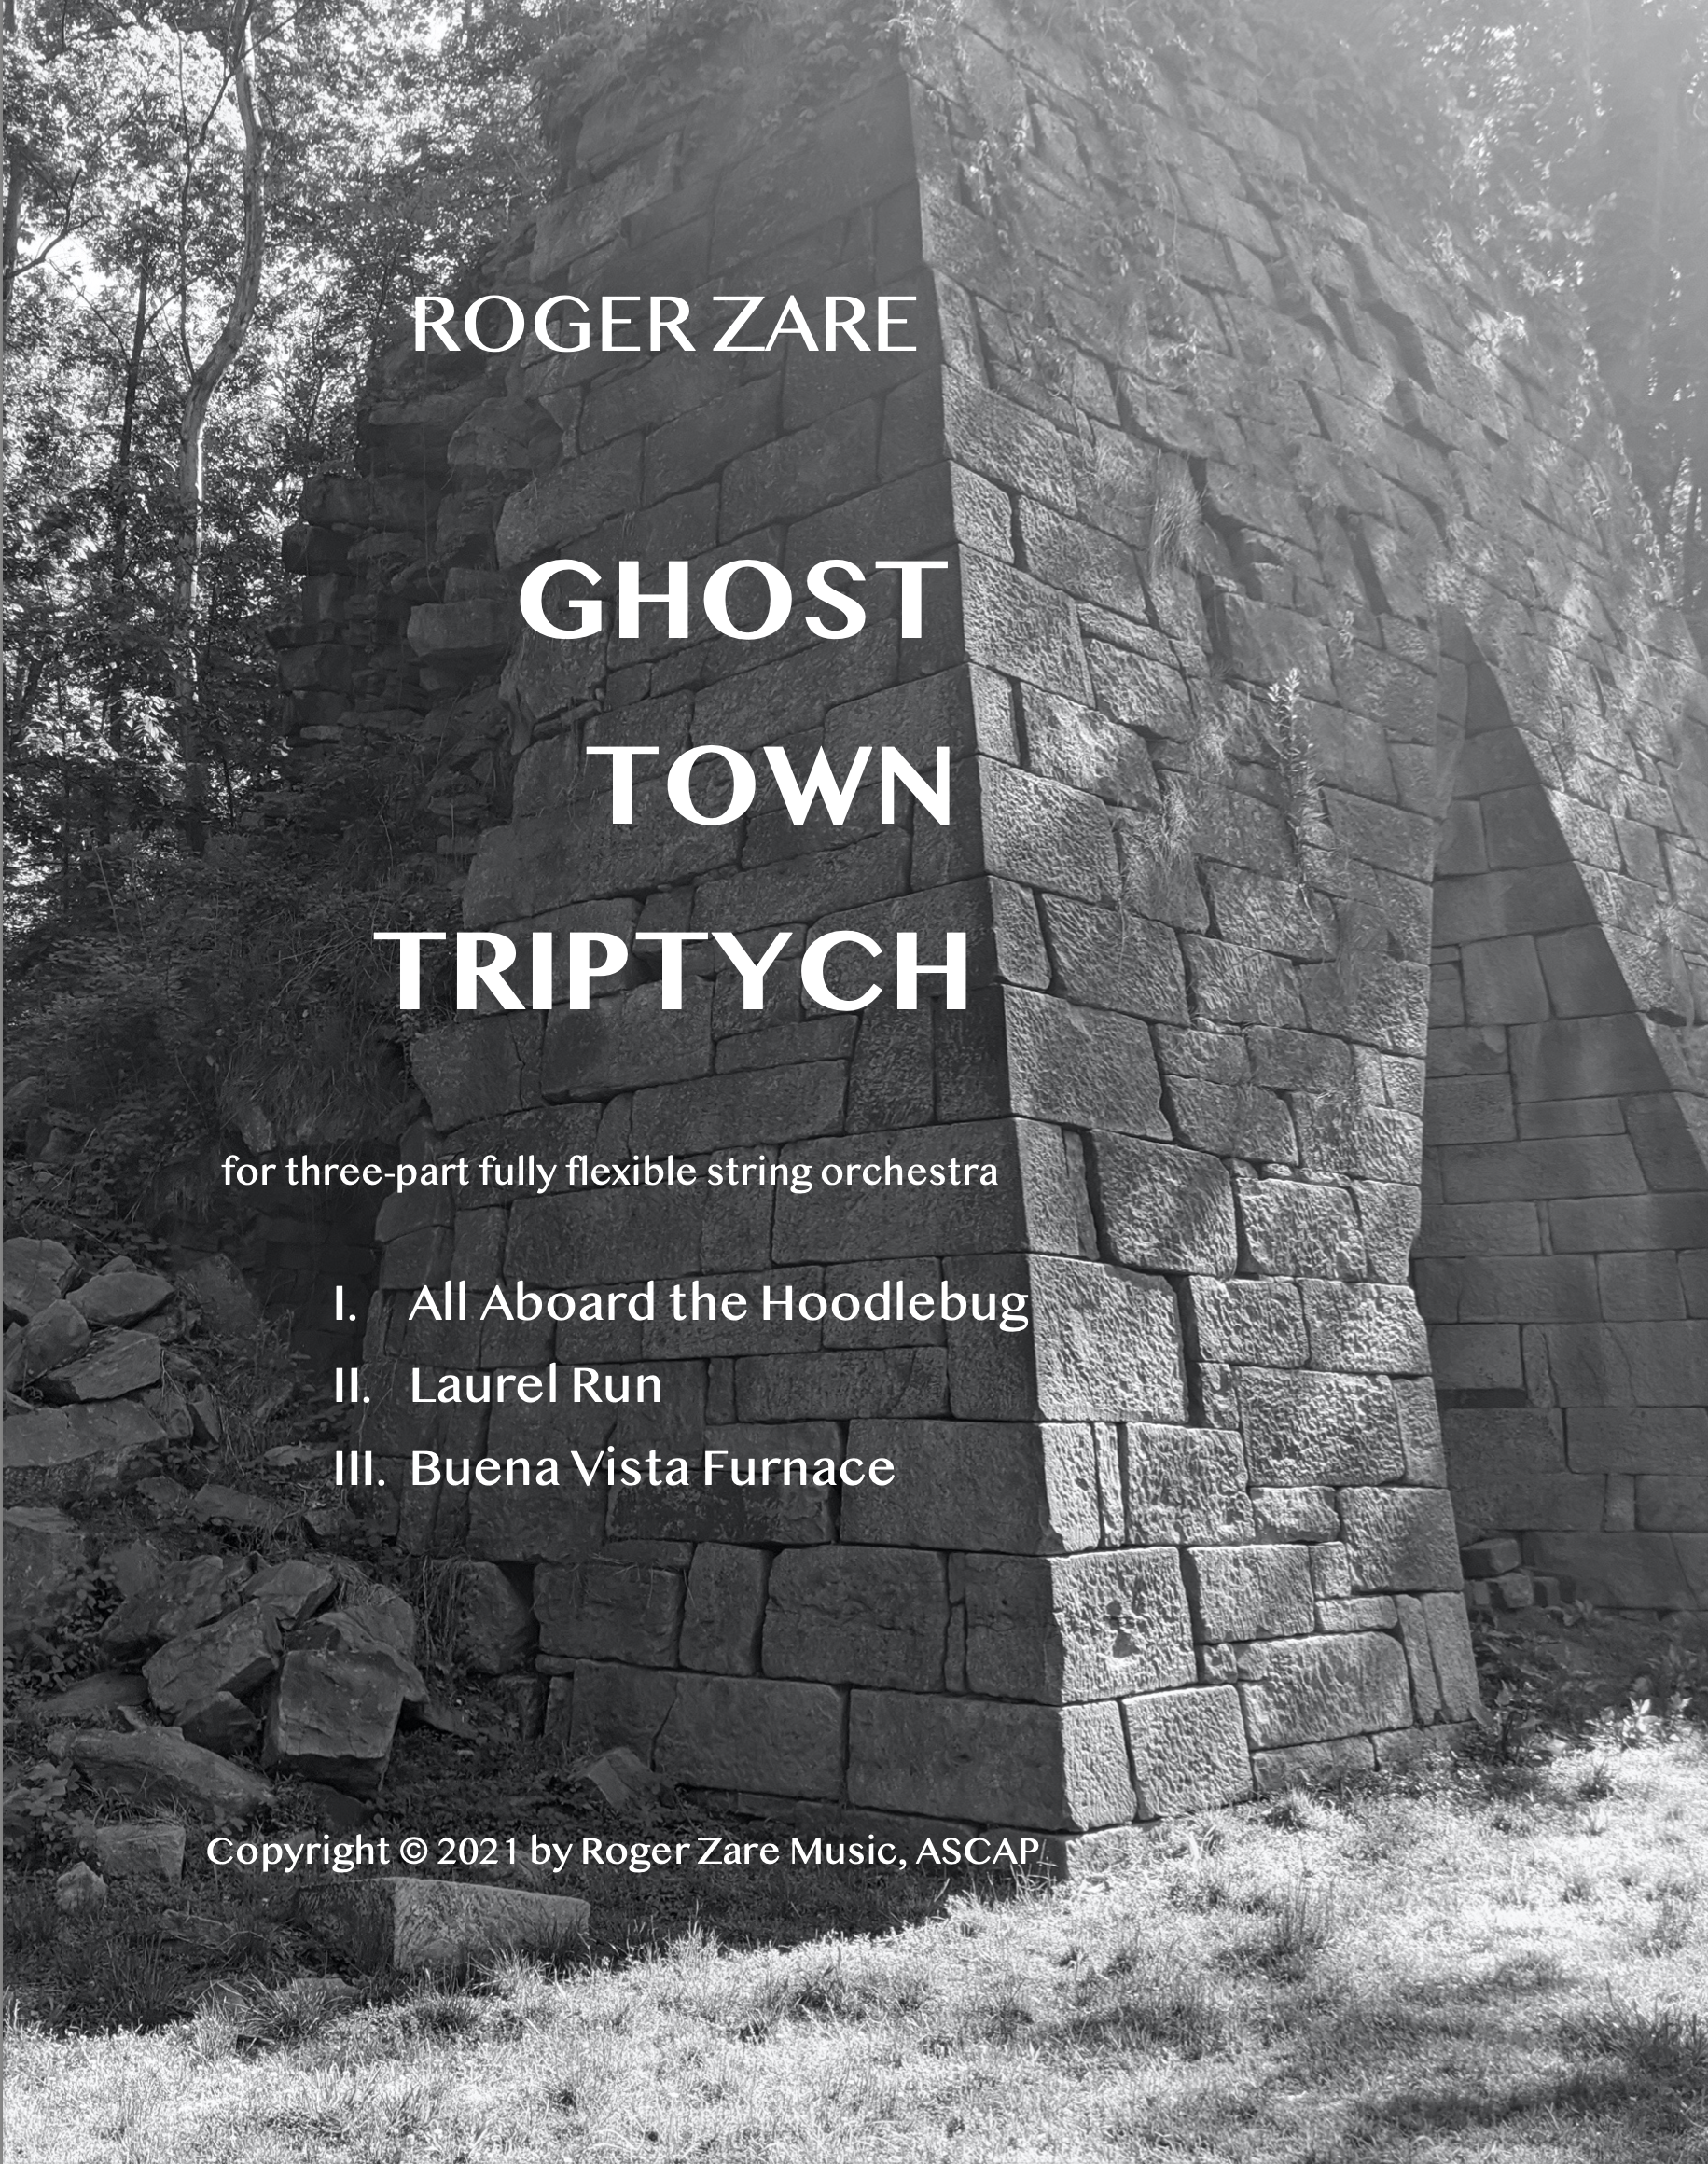 Ghost Town Triptych (Flexible String Version) by Roger Zare